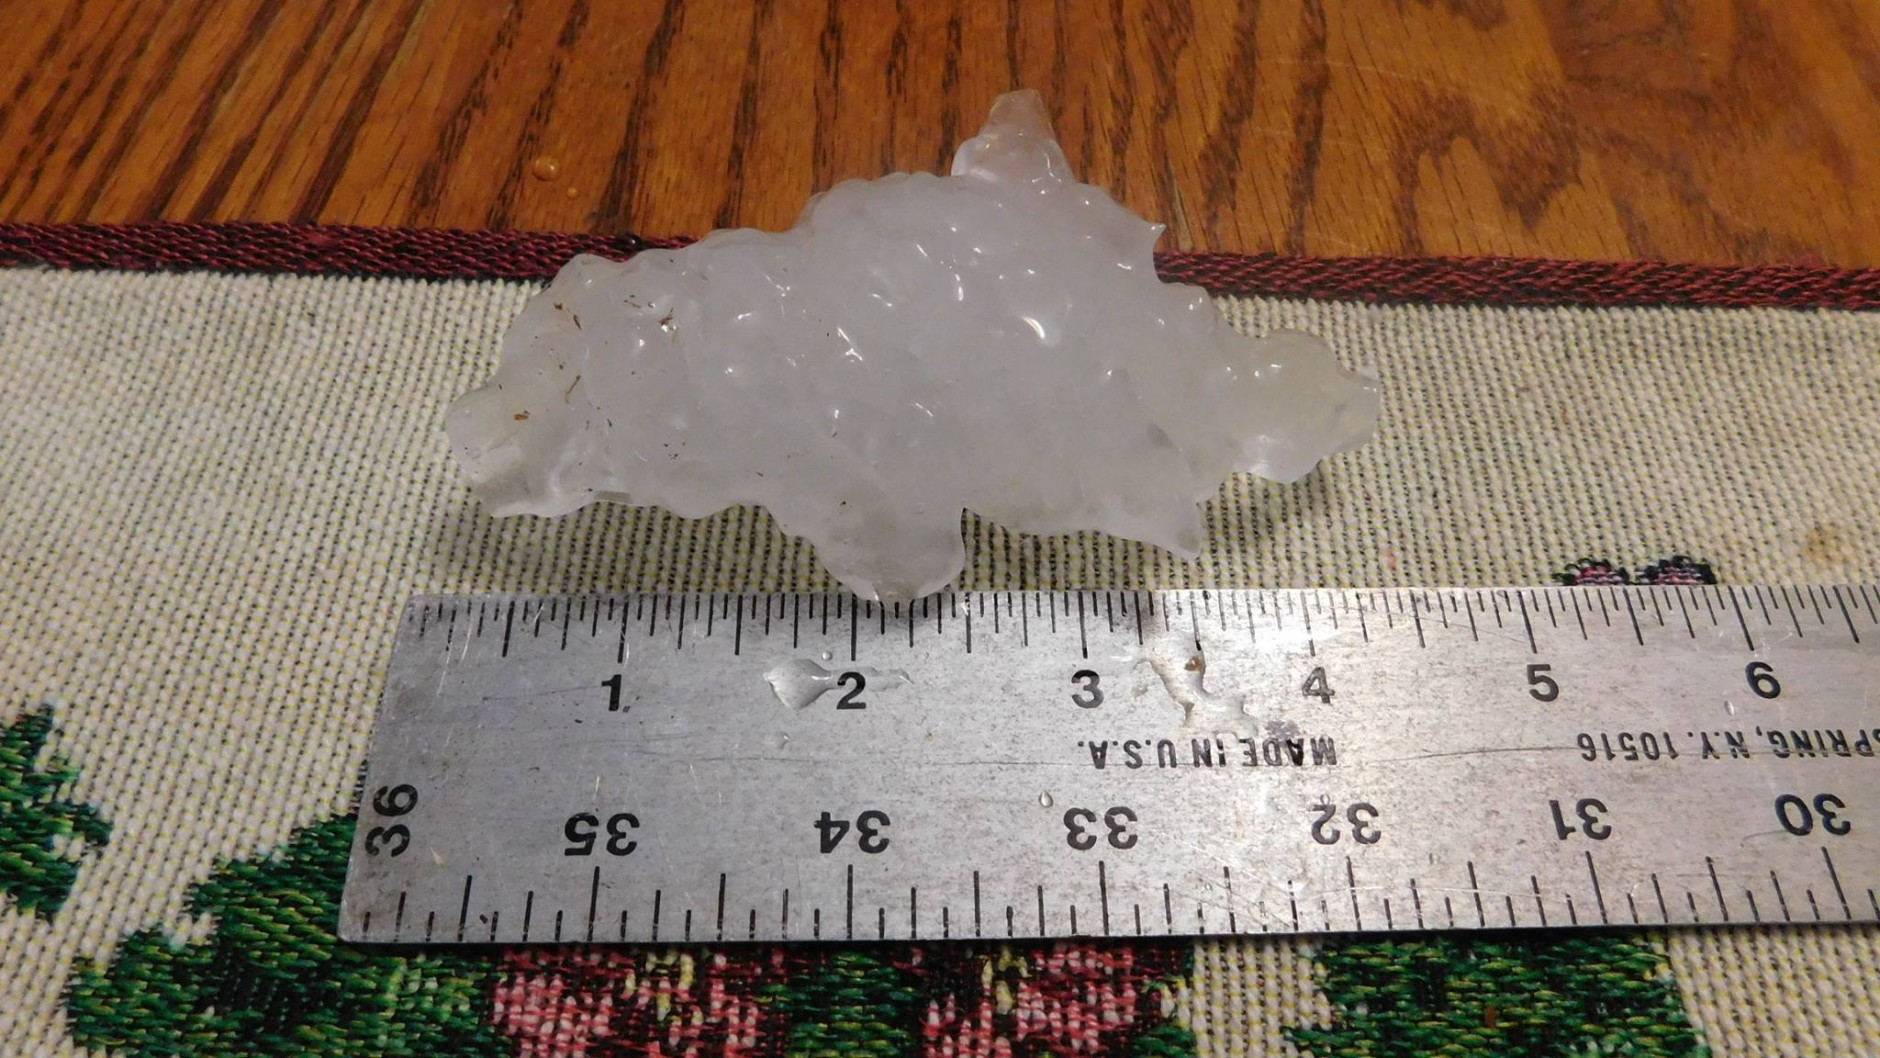 Hail in Maryland on June 21, 2016. (Courtesy Shelly Rencher)